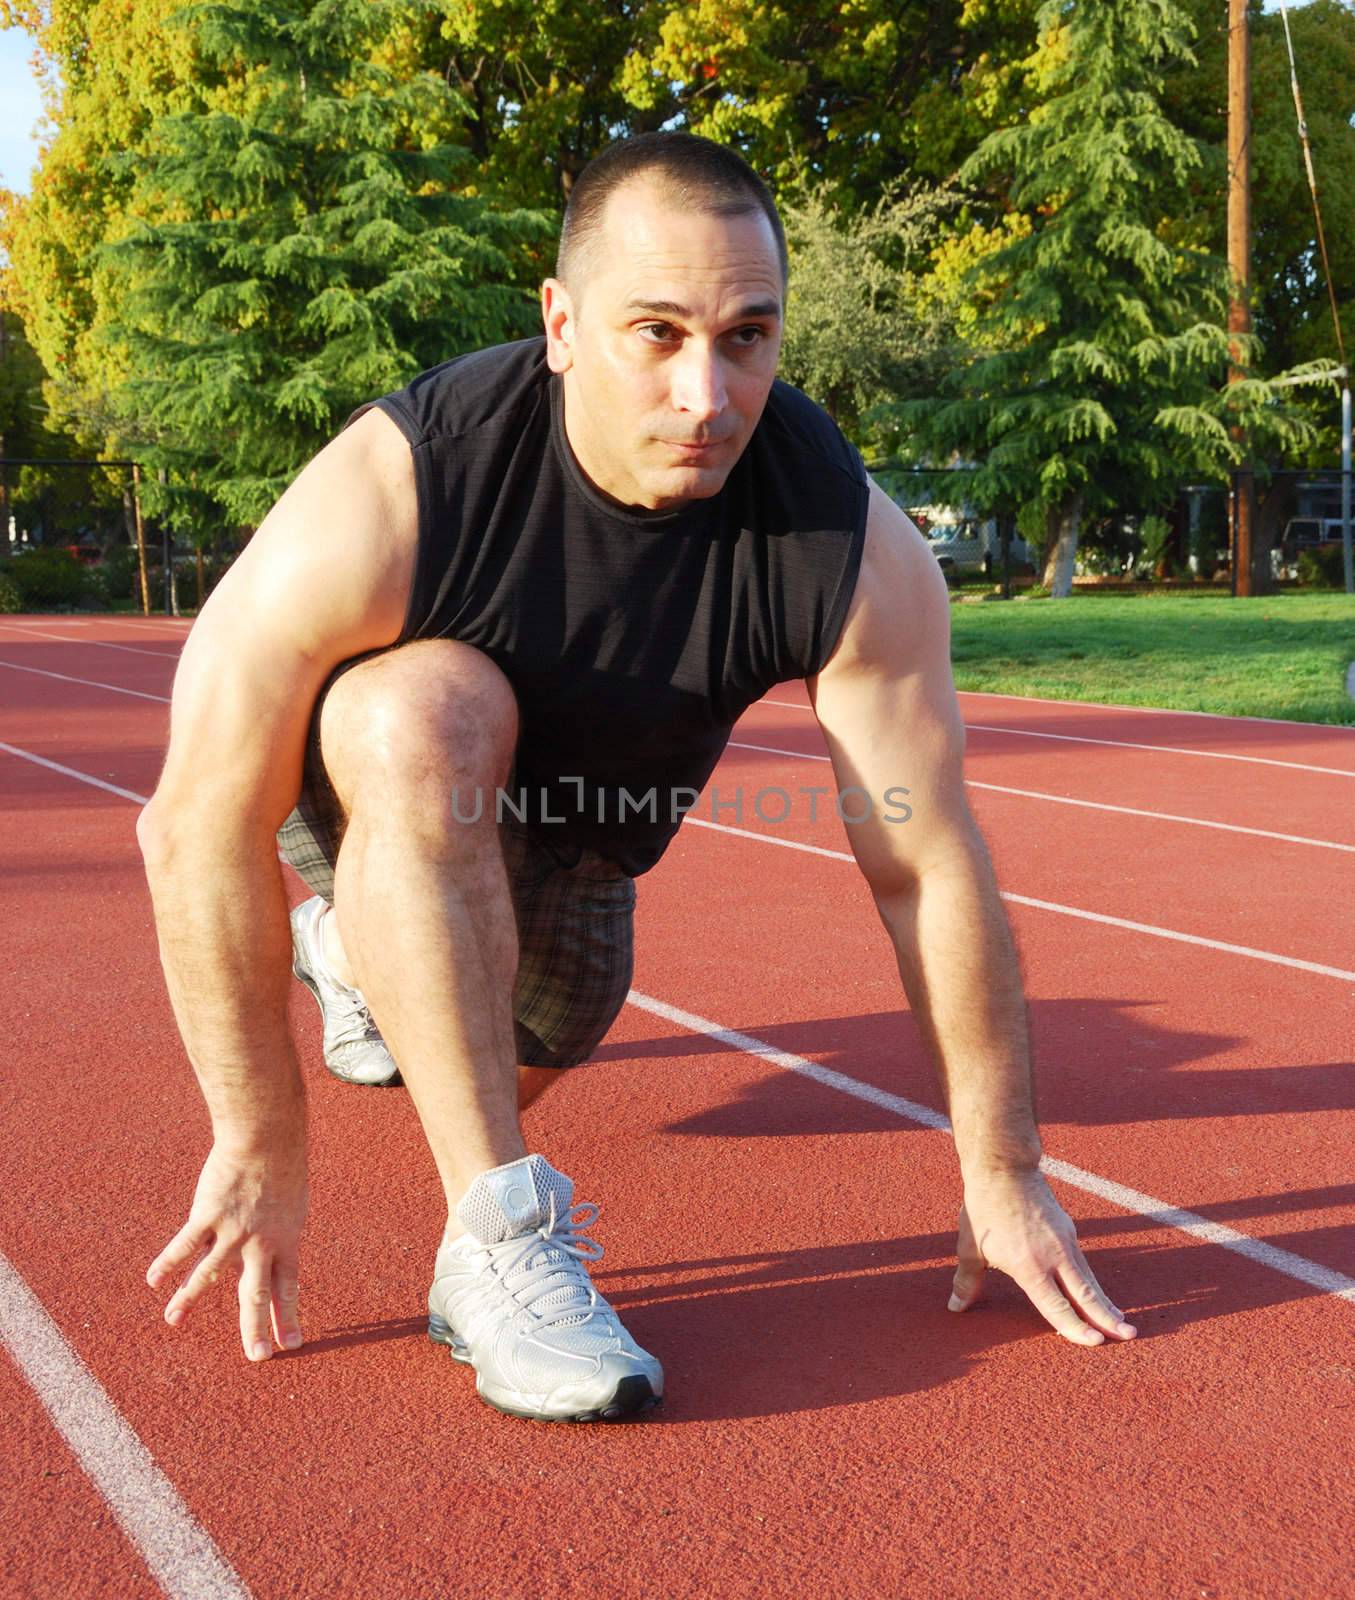 Male athlete getting ready to run on an athletic track with trees in the background on a sunny day.